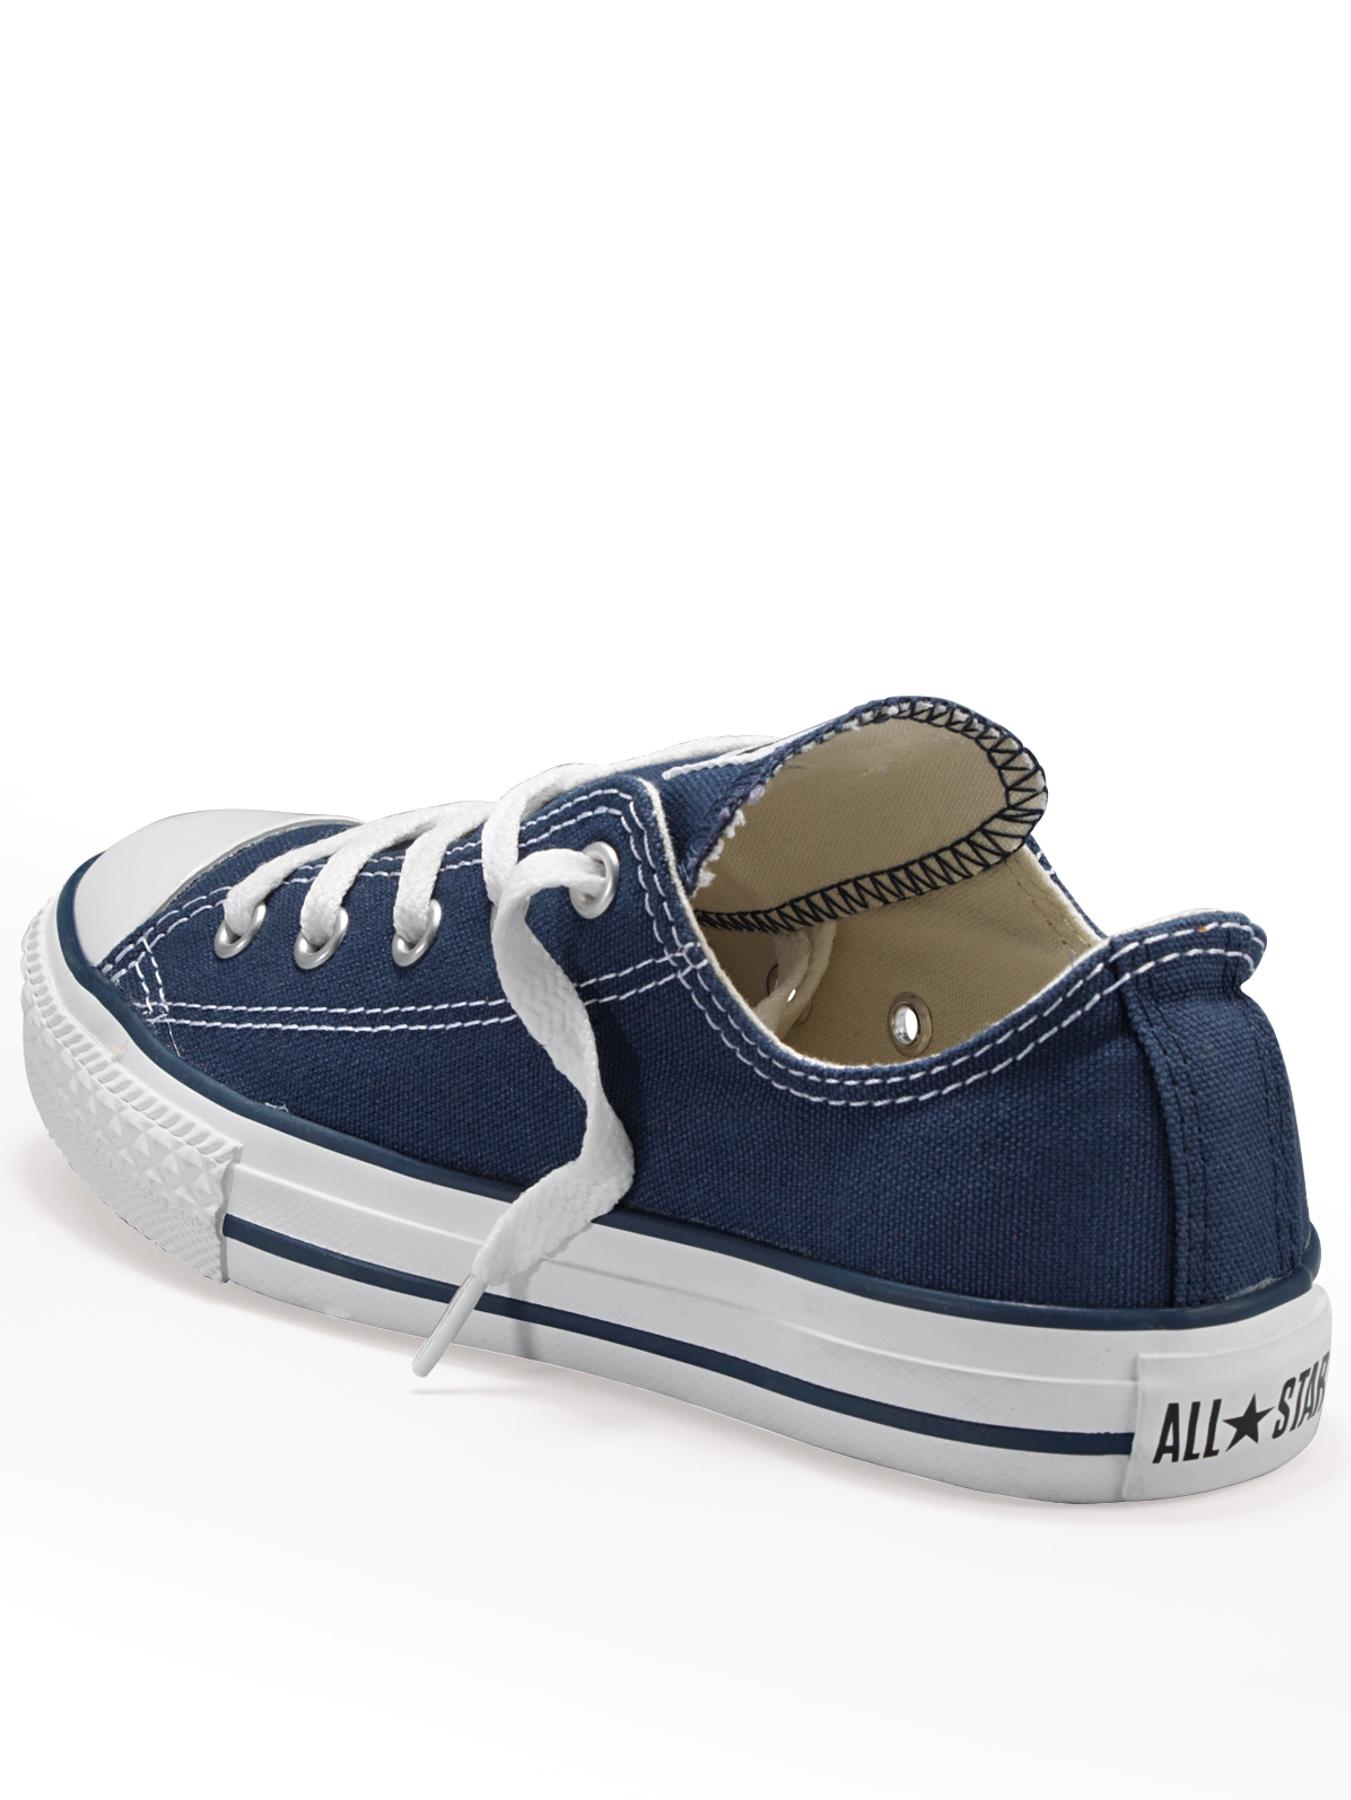 Converse Chuck Taylor All Star Ox Childrens Unisex Trainers -Navy ...